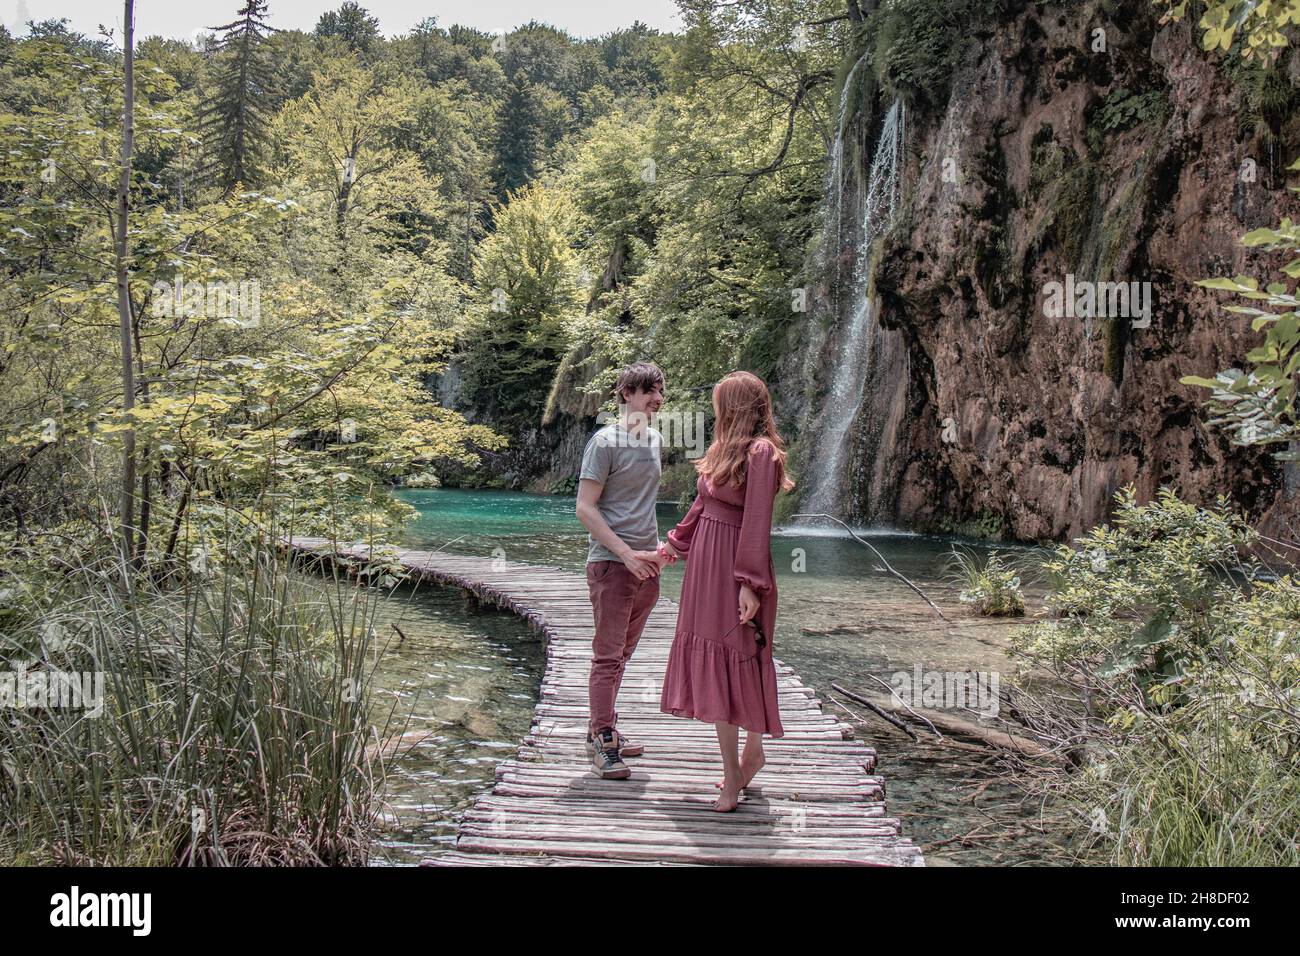 Getting lost in Plitvice Lakes National Park in Croatia. Stock Photo